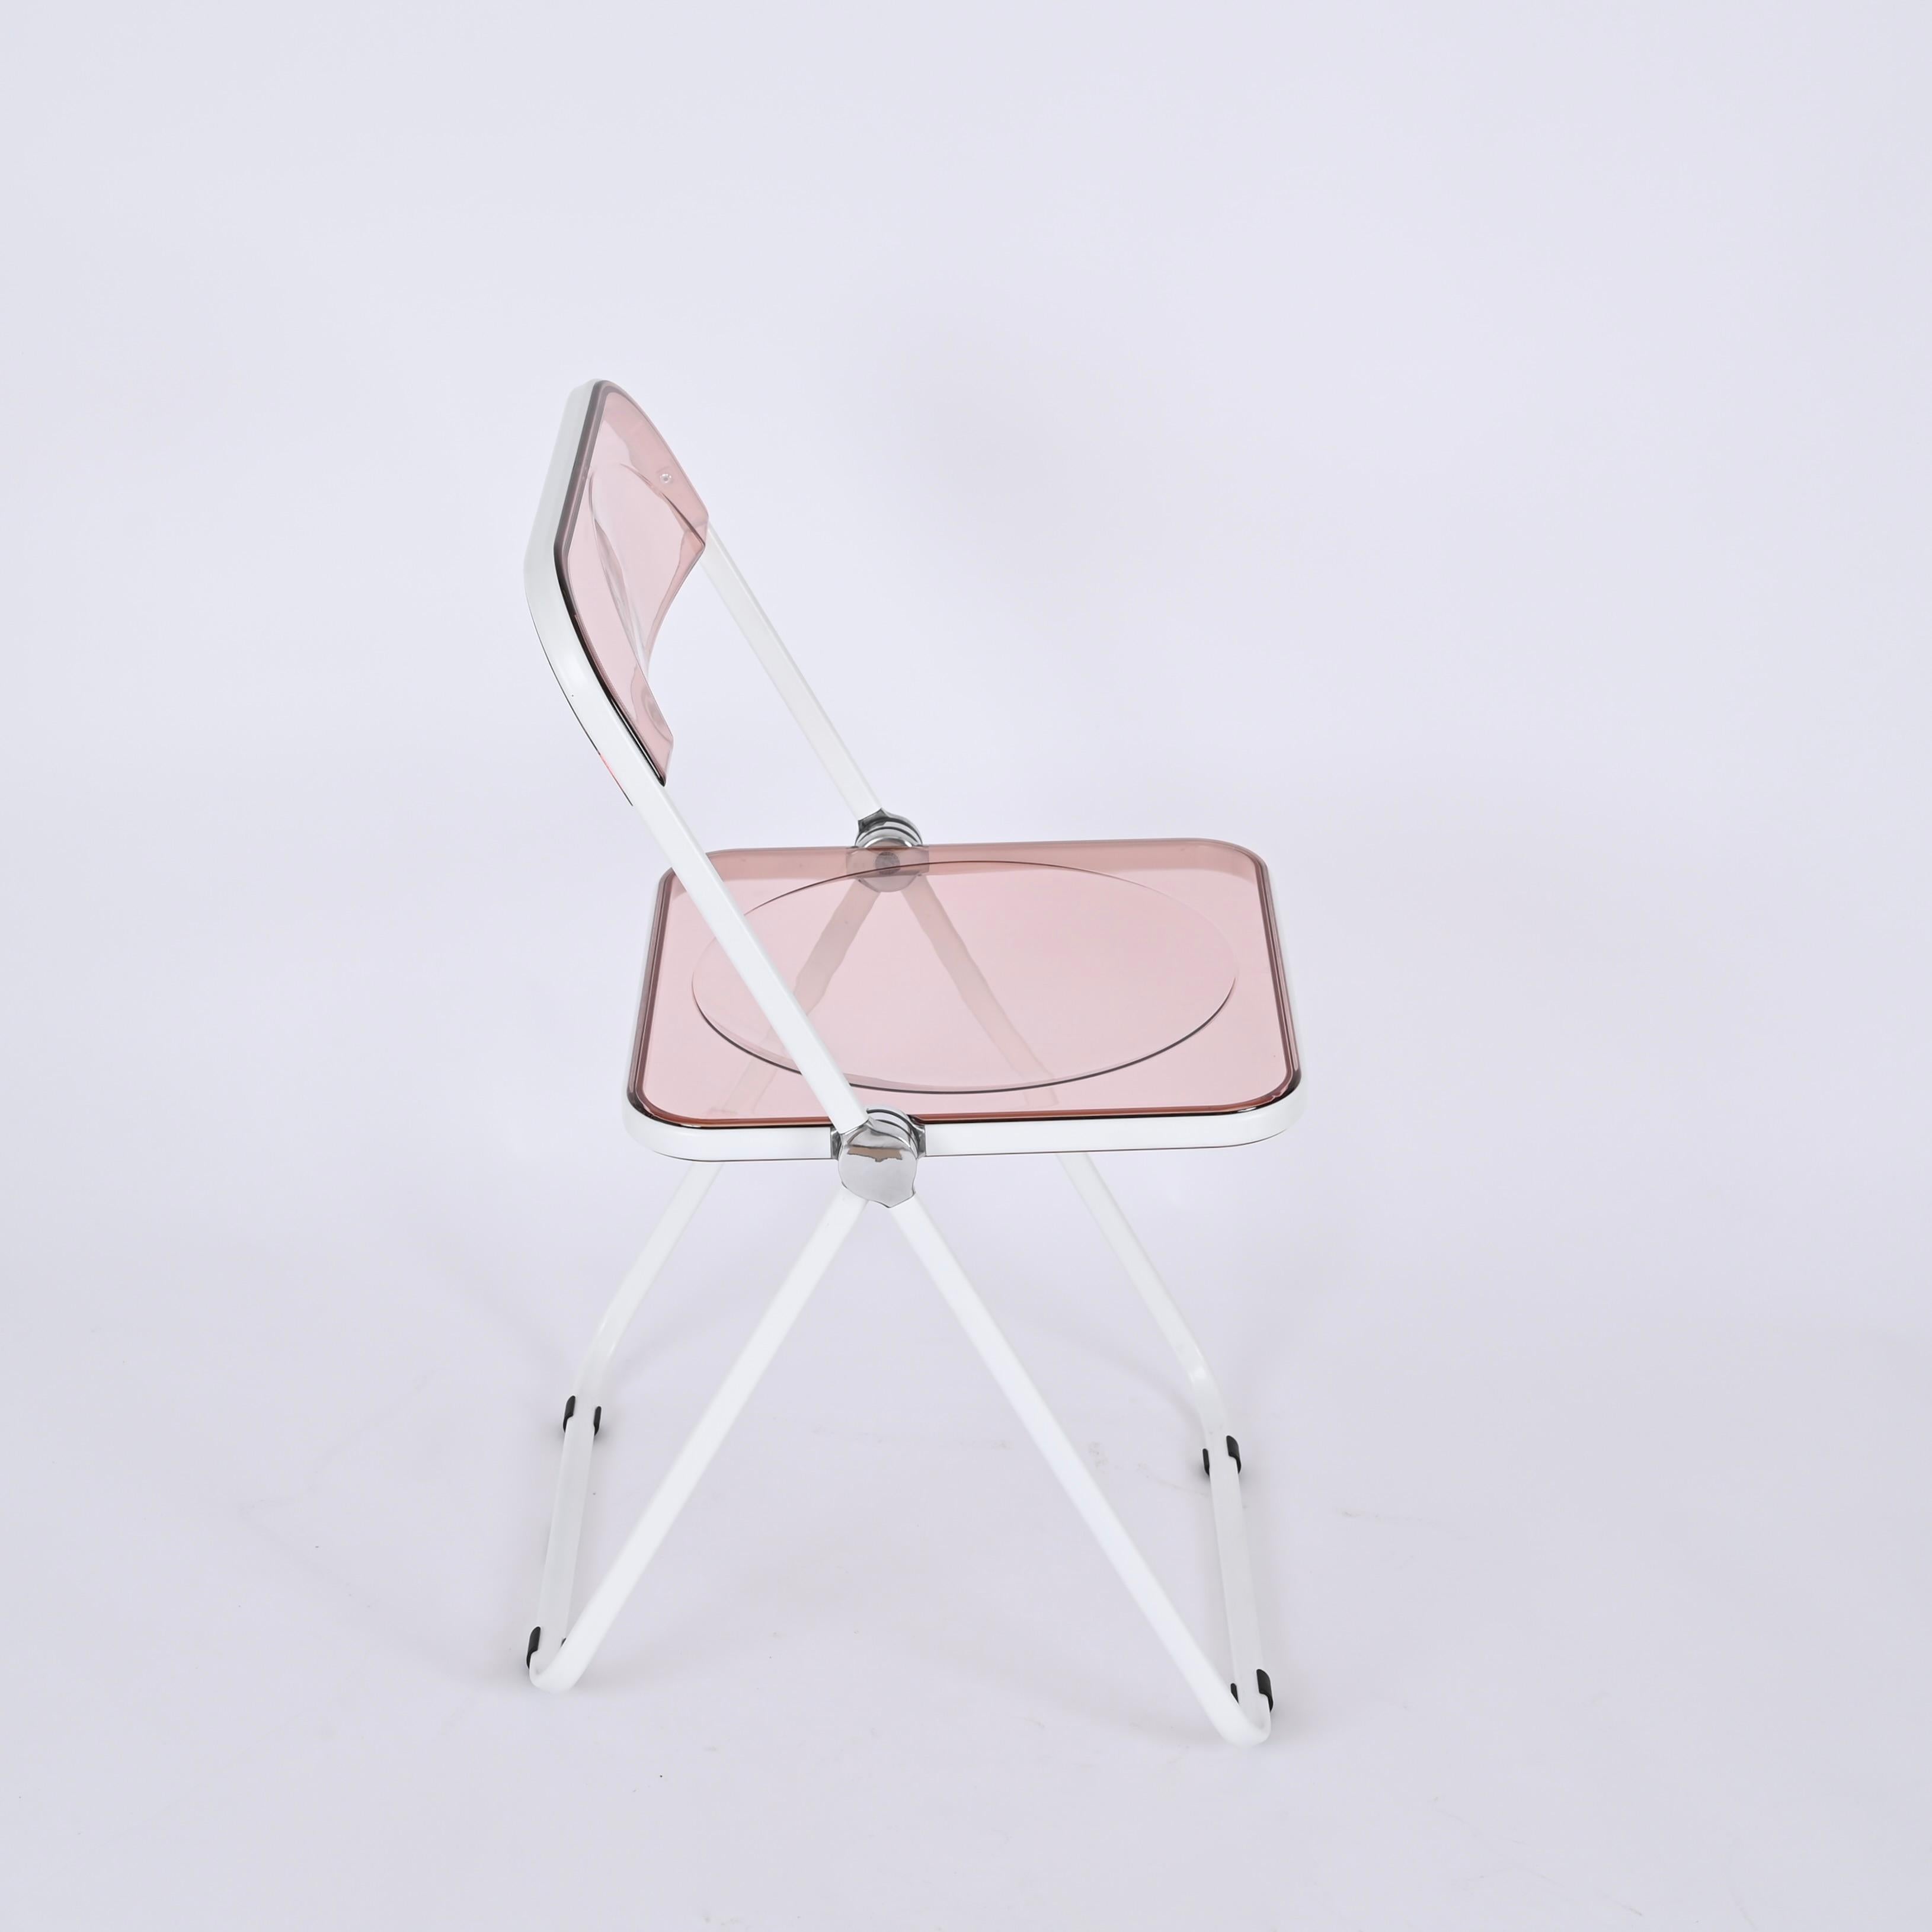 Italian Giancarlo Piretti Lucite Pink and White Folding Plia Chairs for Castelli, 1970s For Sale